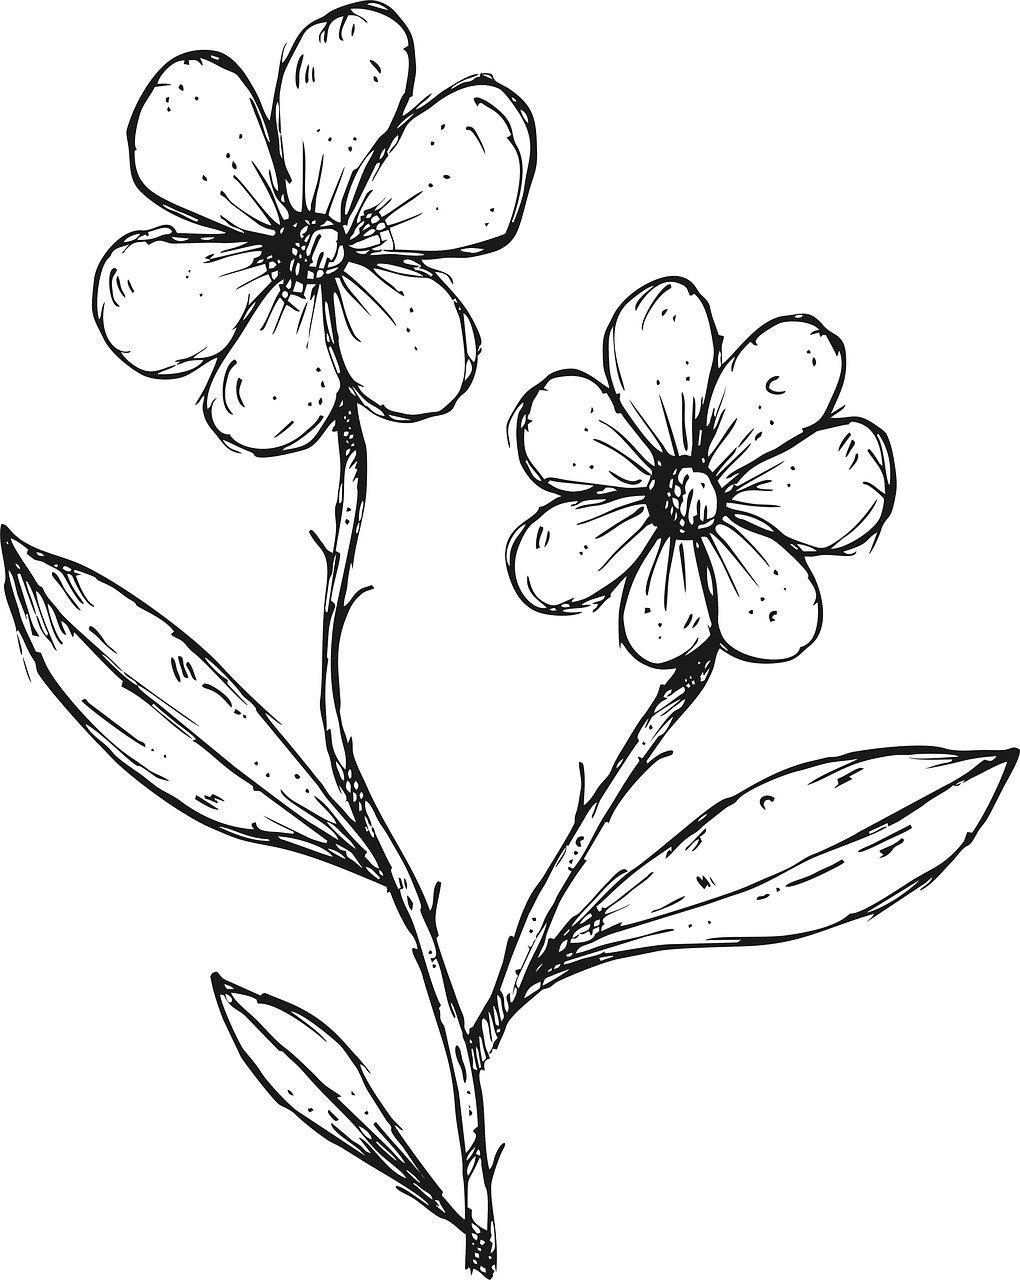 a black and white drawing of two flowers, an ink drawing, sketch style, manuka, drawn in microsoft paint, engraving illustration